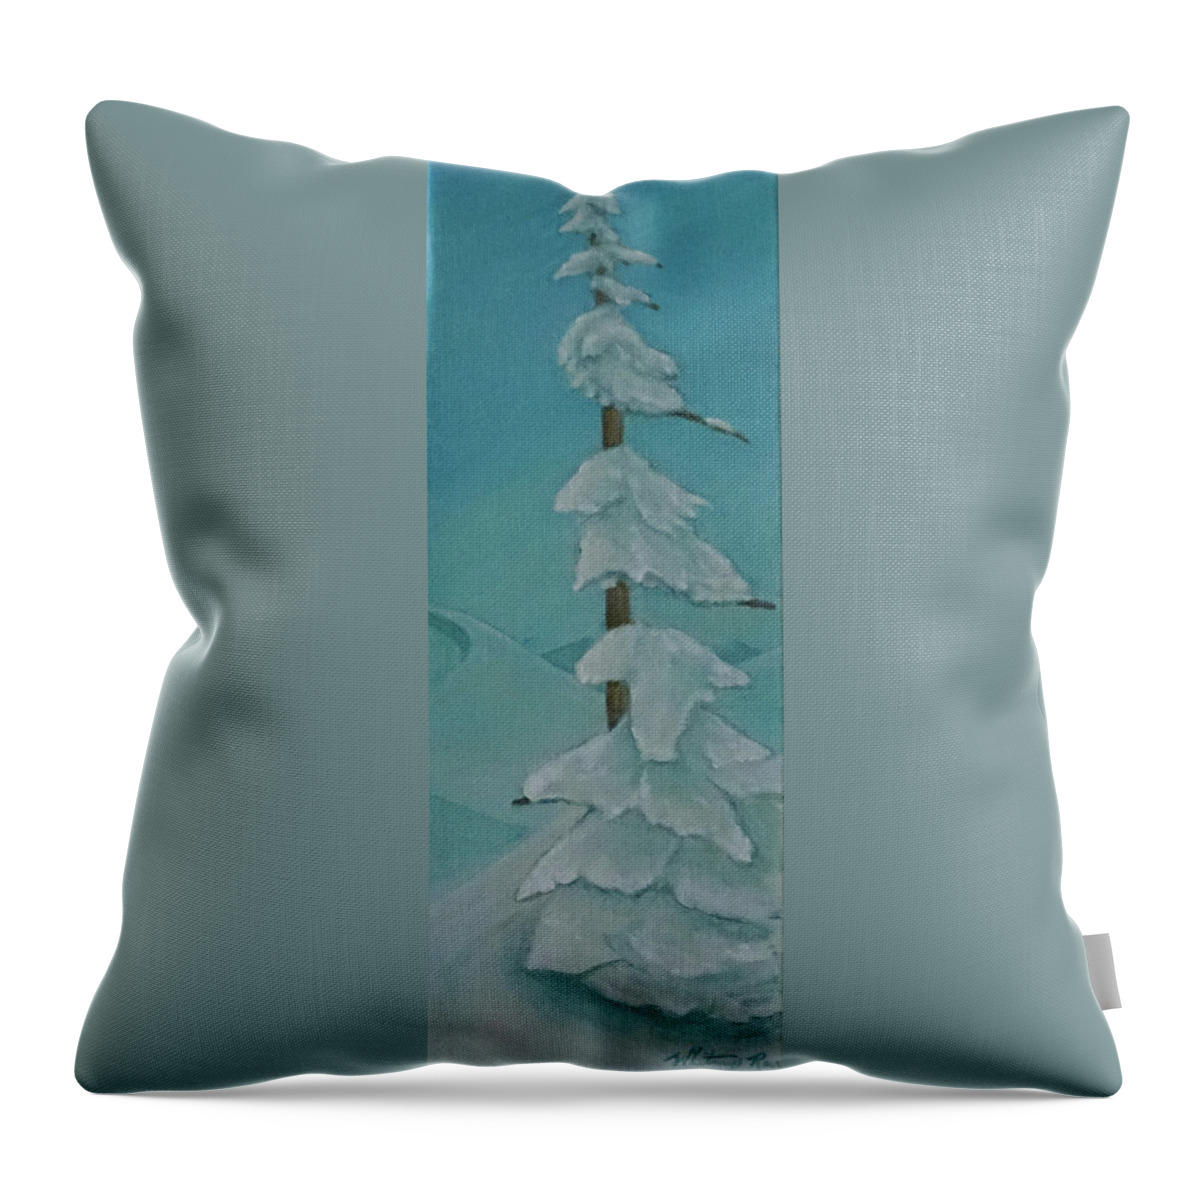 Skiing Throw Pillow featuring the painting Alpine Tree by Whitney Palmer